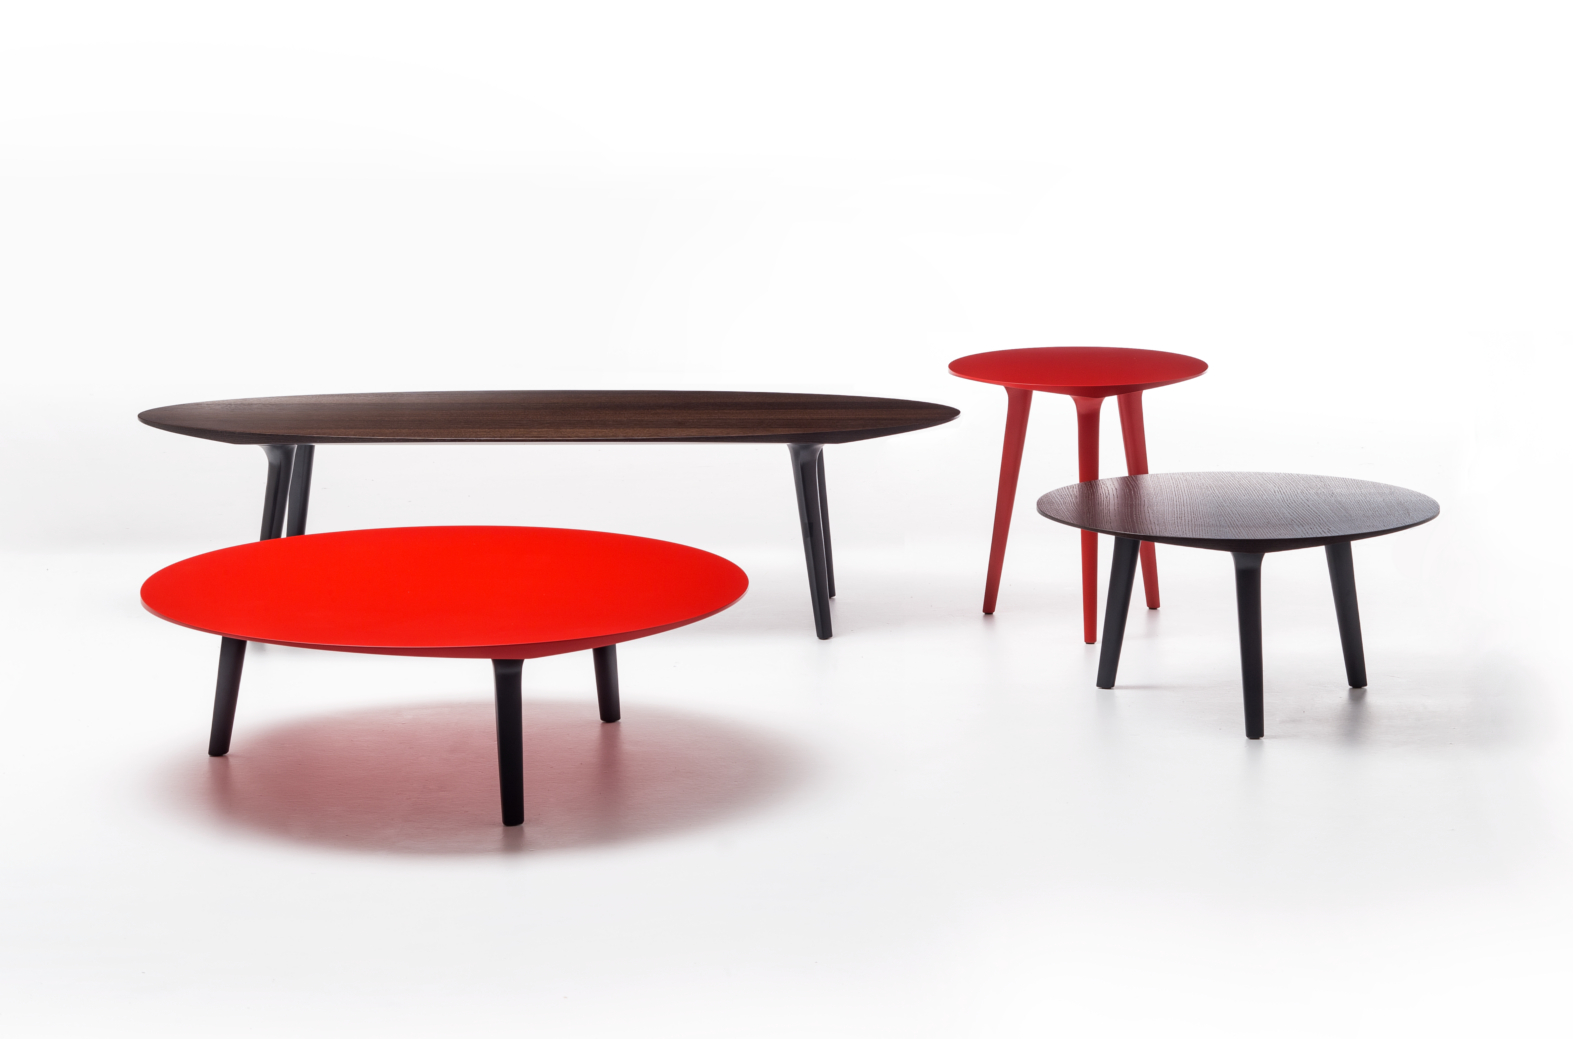 ADEMAR Tables by Giulio Iacchetti for Bross